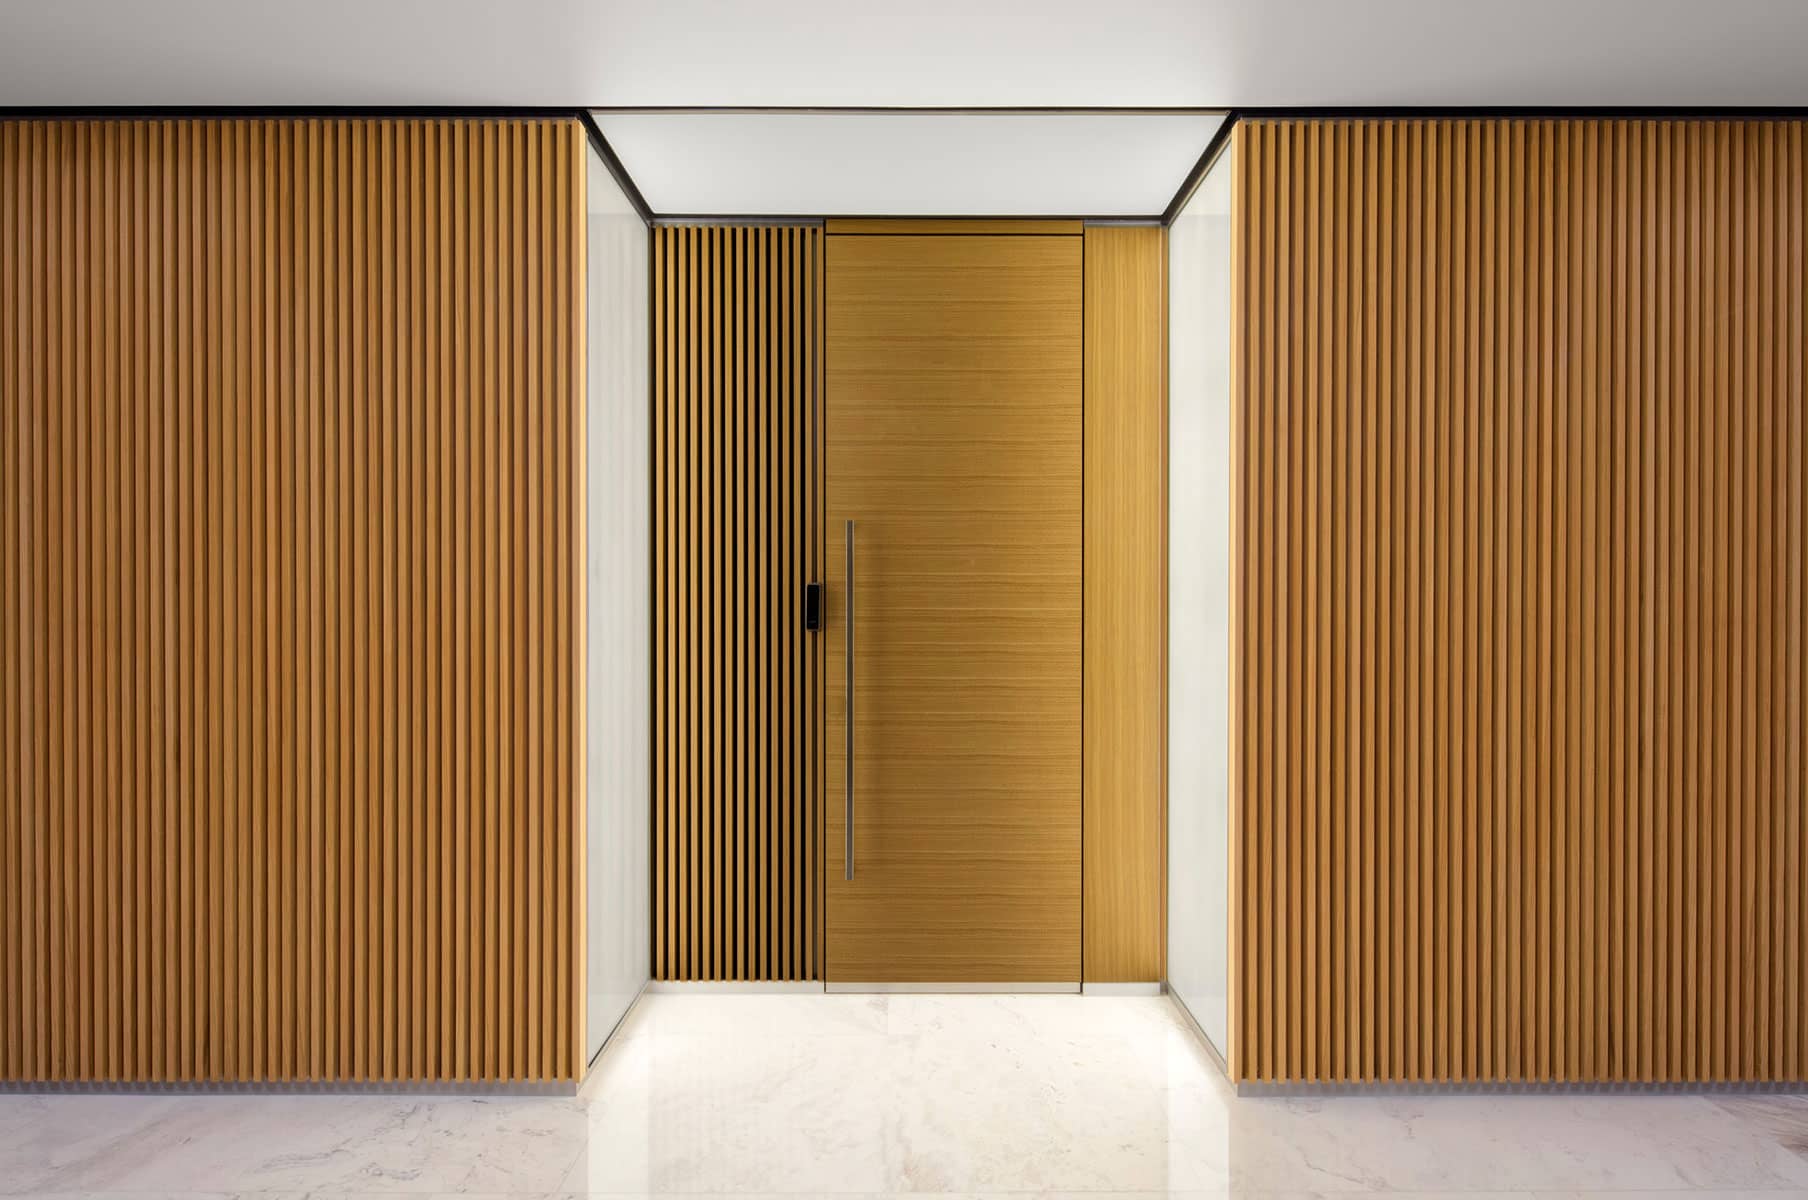 Architecture Photography: Wall panelling detail: Commercial Office: Dubai